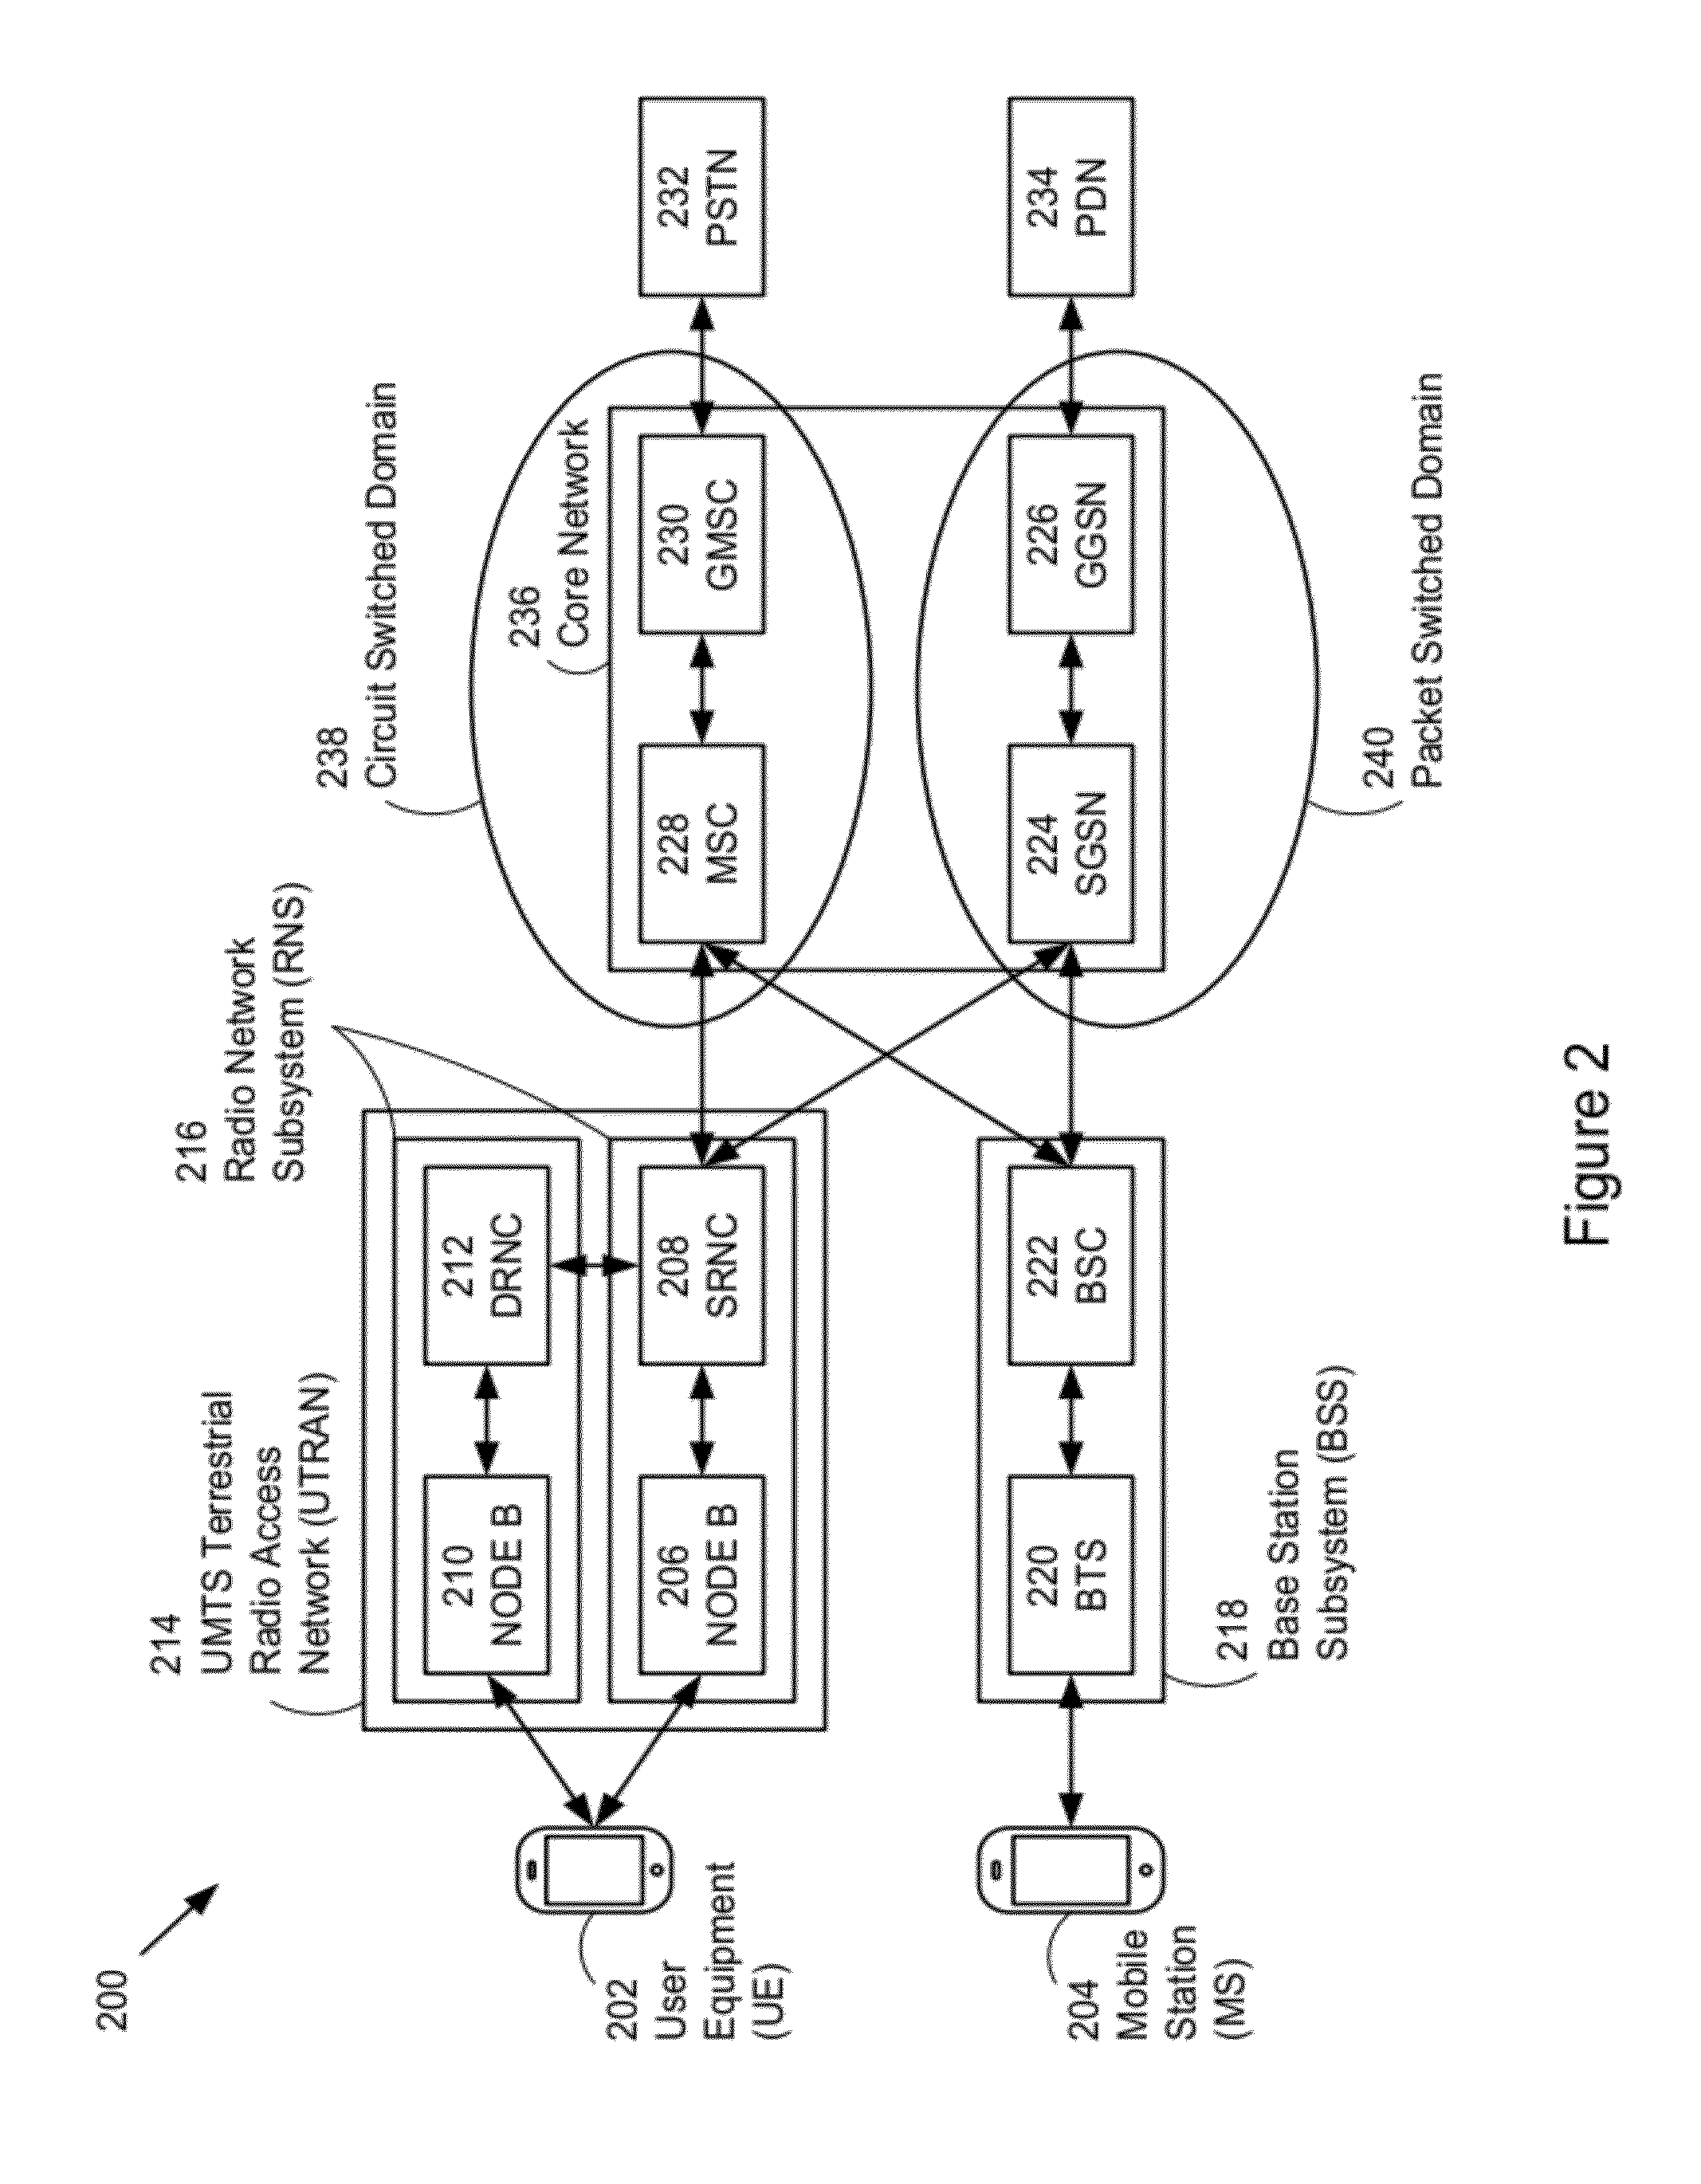 Adapting transmission to improve QoS in a mobile wireless device